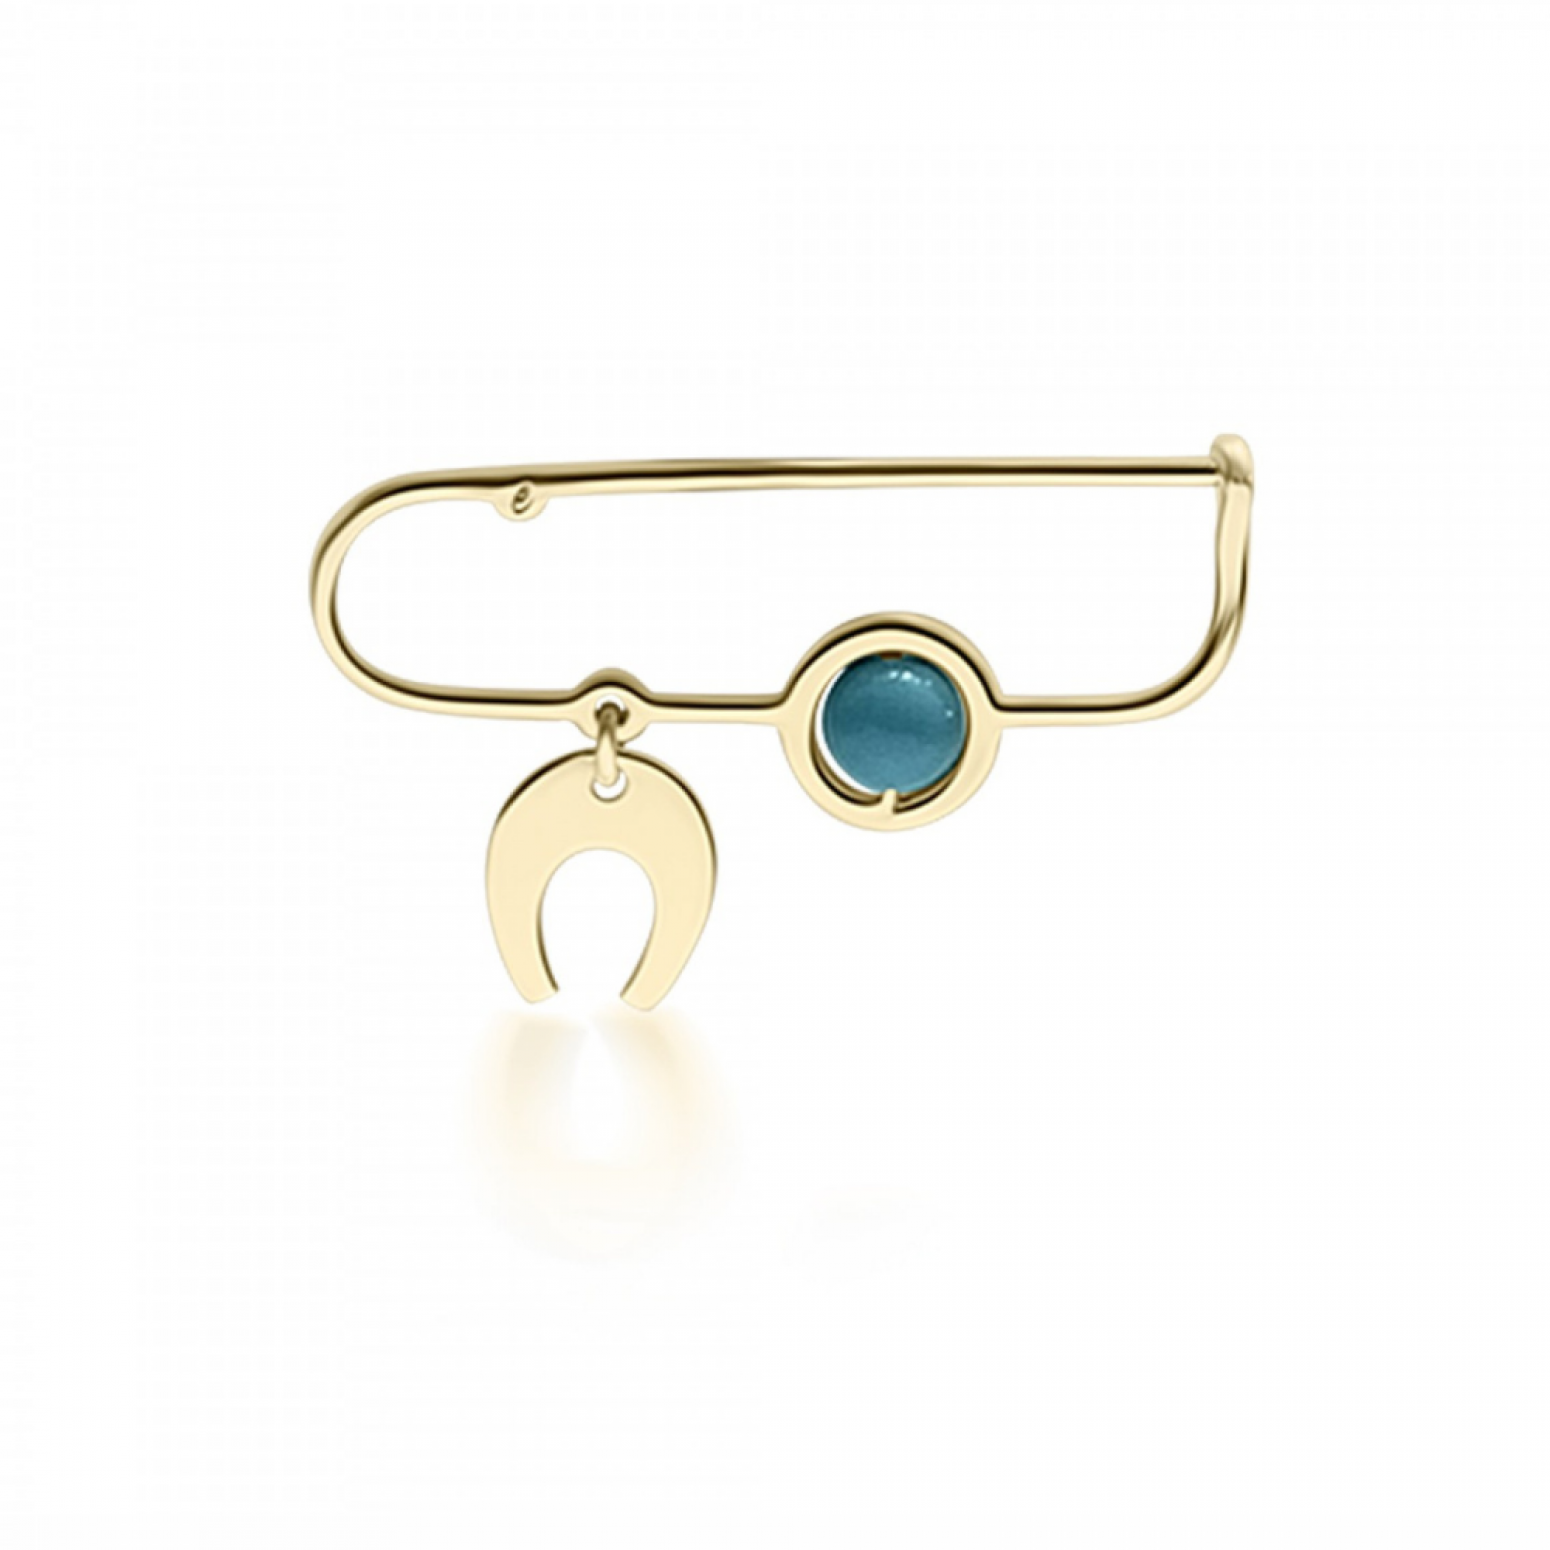 Babies pin K14 gold with petal and turquoise pf0124 BABIES Κοσμηματα - chrilia.gr